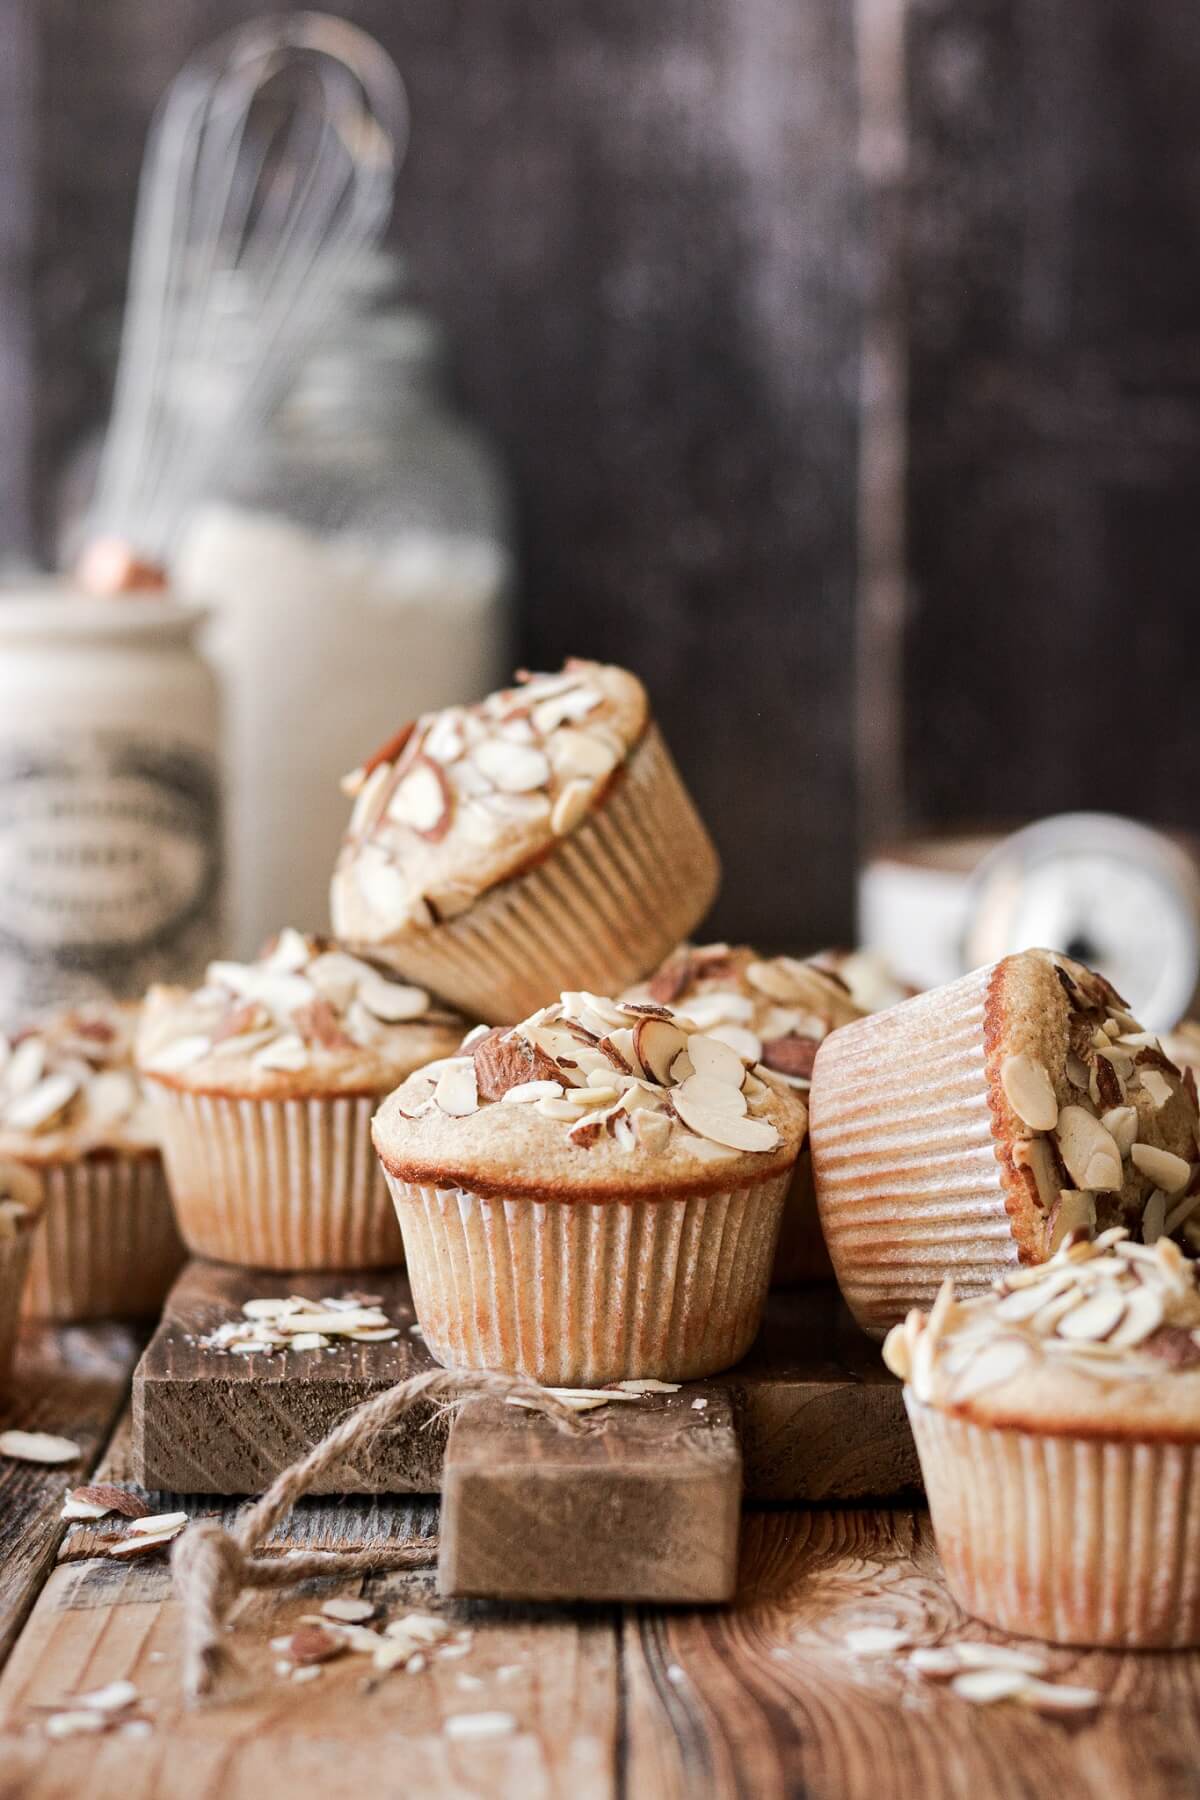 Almond muffins stacked on a wooden board.